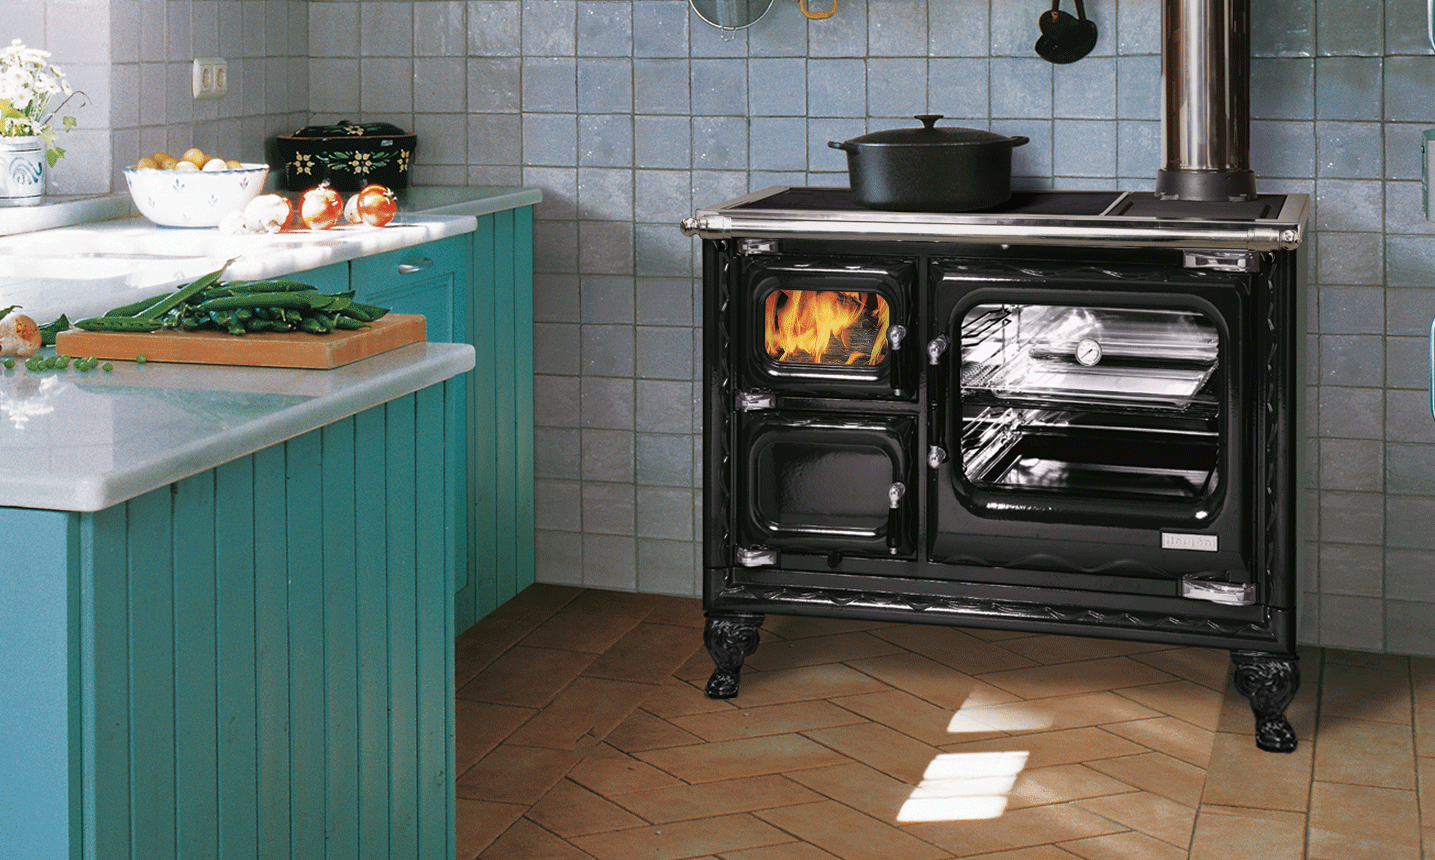 14 Reasons Wood Cookstoves Are A Homestead Must-Have